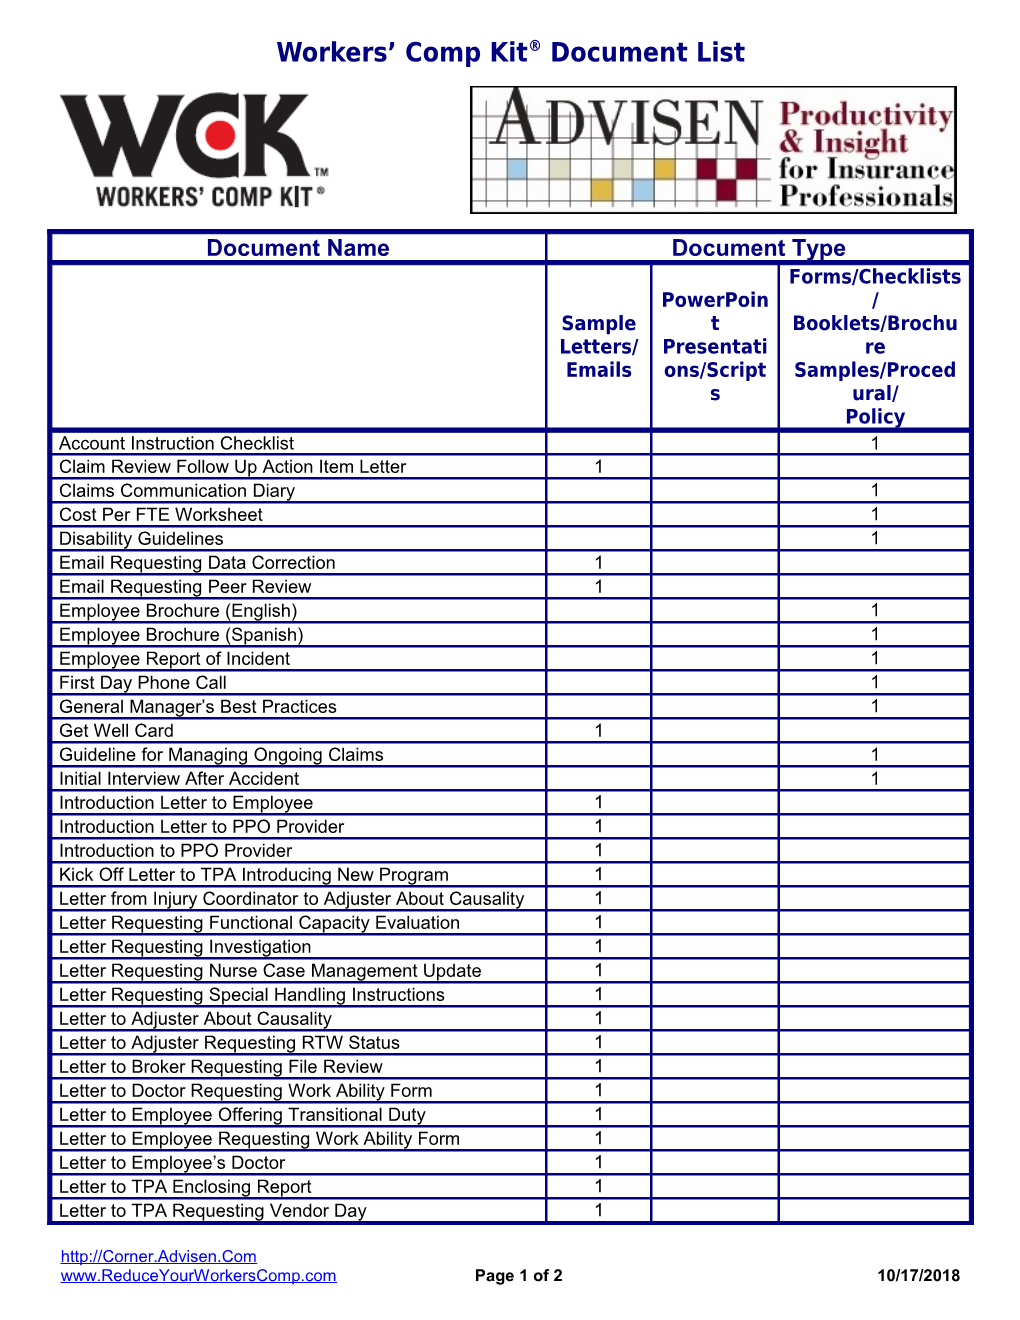 Workers Comp Kit Document List